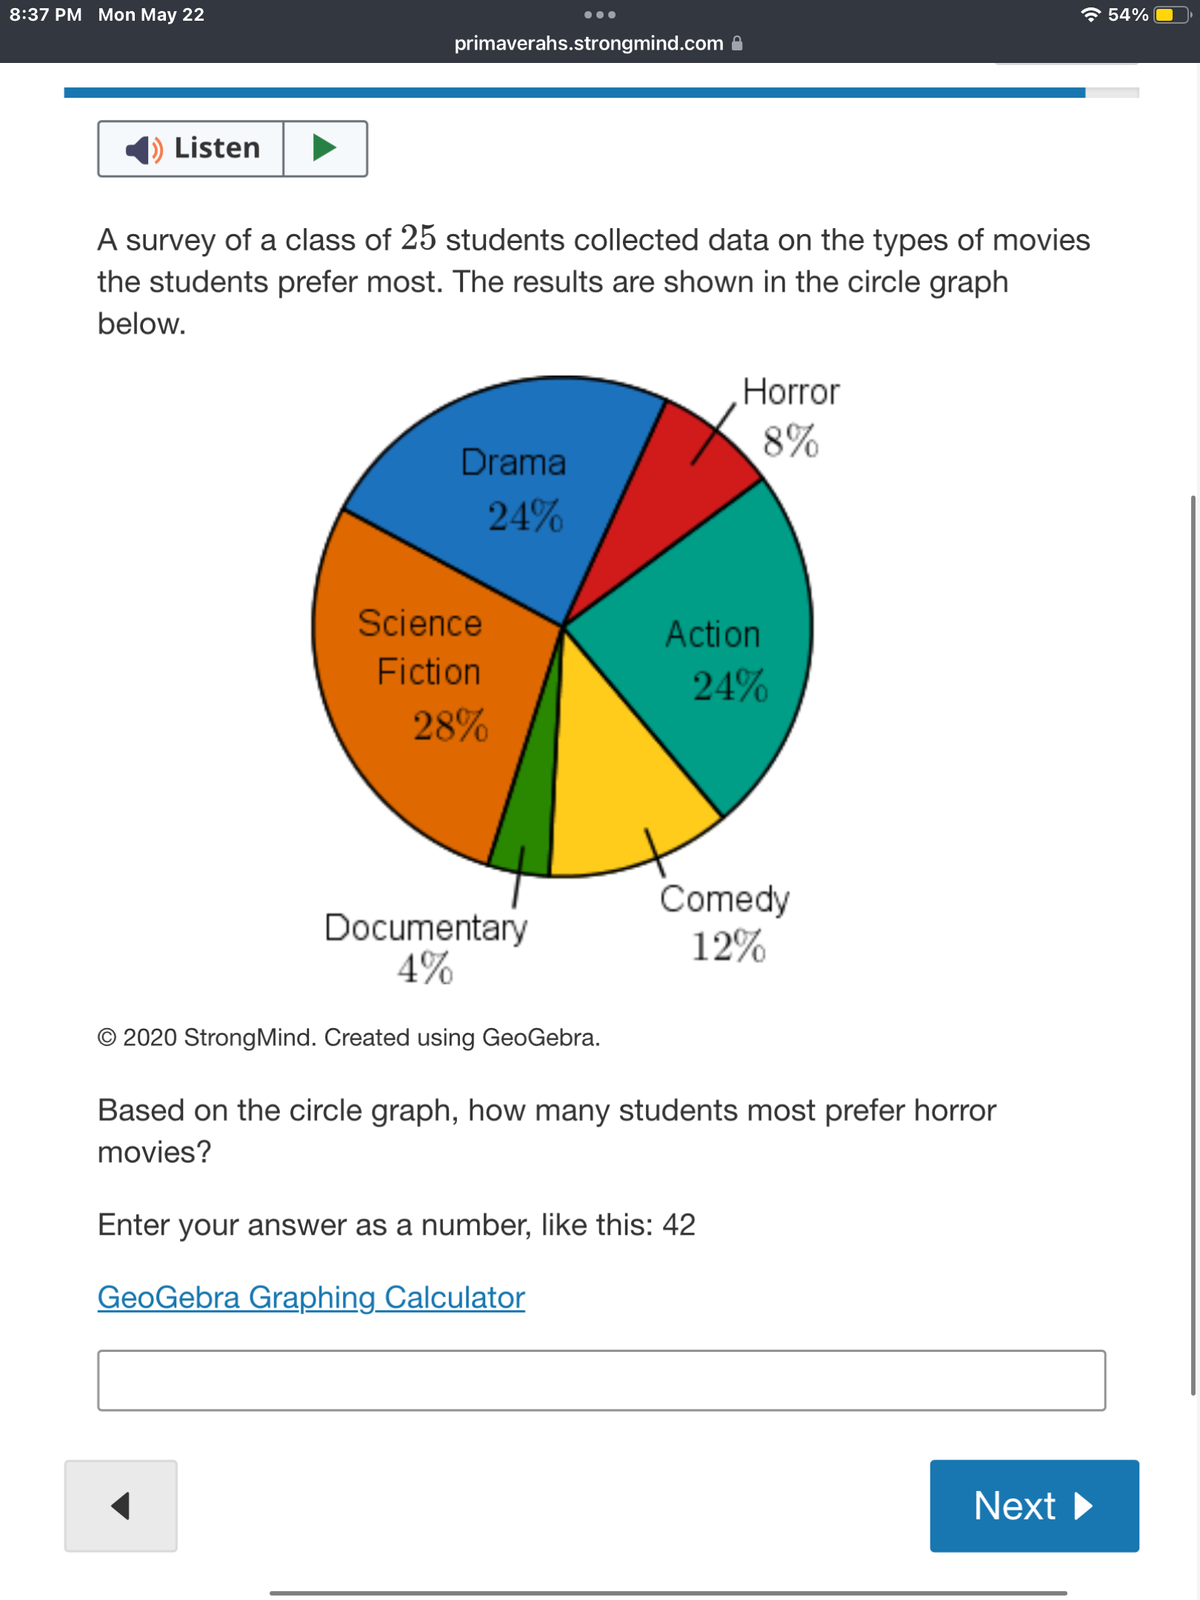 8:37 PM Mon May 22
1) Listen
primaverahs.strongmind.com
A survey of a class of 25 students collected data on the types of movies
the students prefer most. The results are shown in the circle graph
below.
Drama
24%
Science
Fiction
←
●●●
28%
Documentary
4%
O 2020 Strong Mind. Created using GeoGebra.
Horror
8%
Action
24%
Comedy
12%
Based on the circle graph, how many students most prefer horror
movies?
Enter your answer as a number, like this: 42
GeoGebra Graphing Calculator
Next ▶
54%